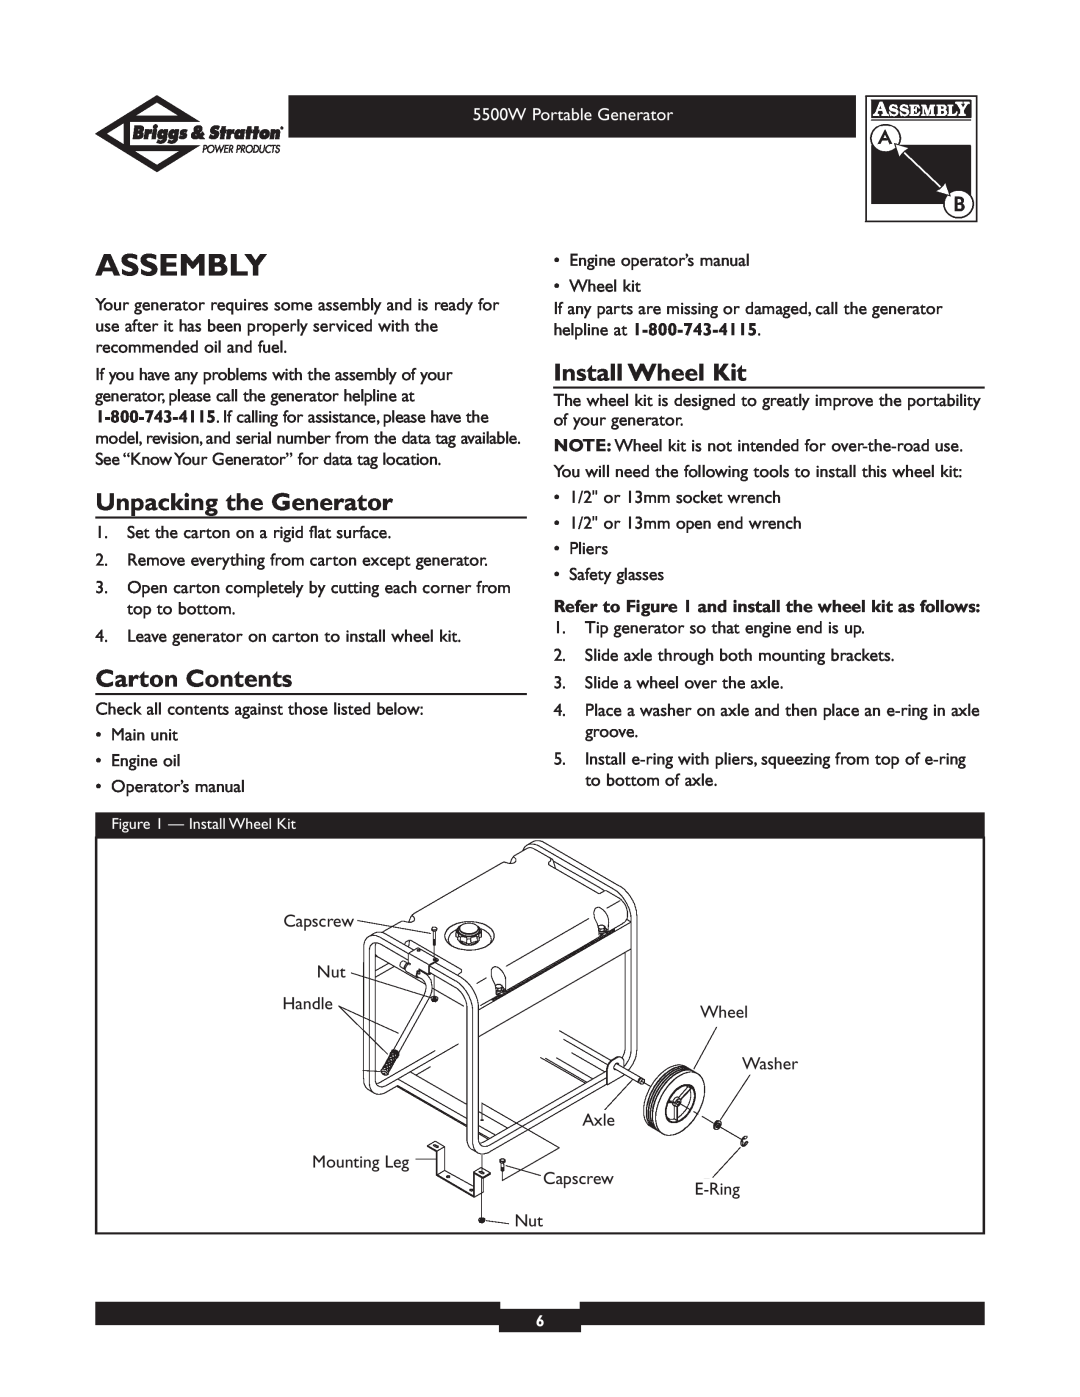 Briggs & Stratton 030209-1 operating instructions Assembly, Unpacking the Generator, Carton Contents, Install Wheel Kit 